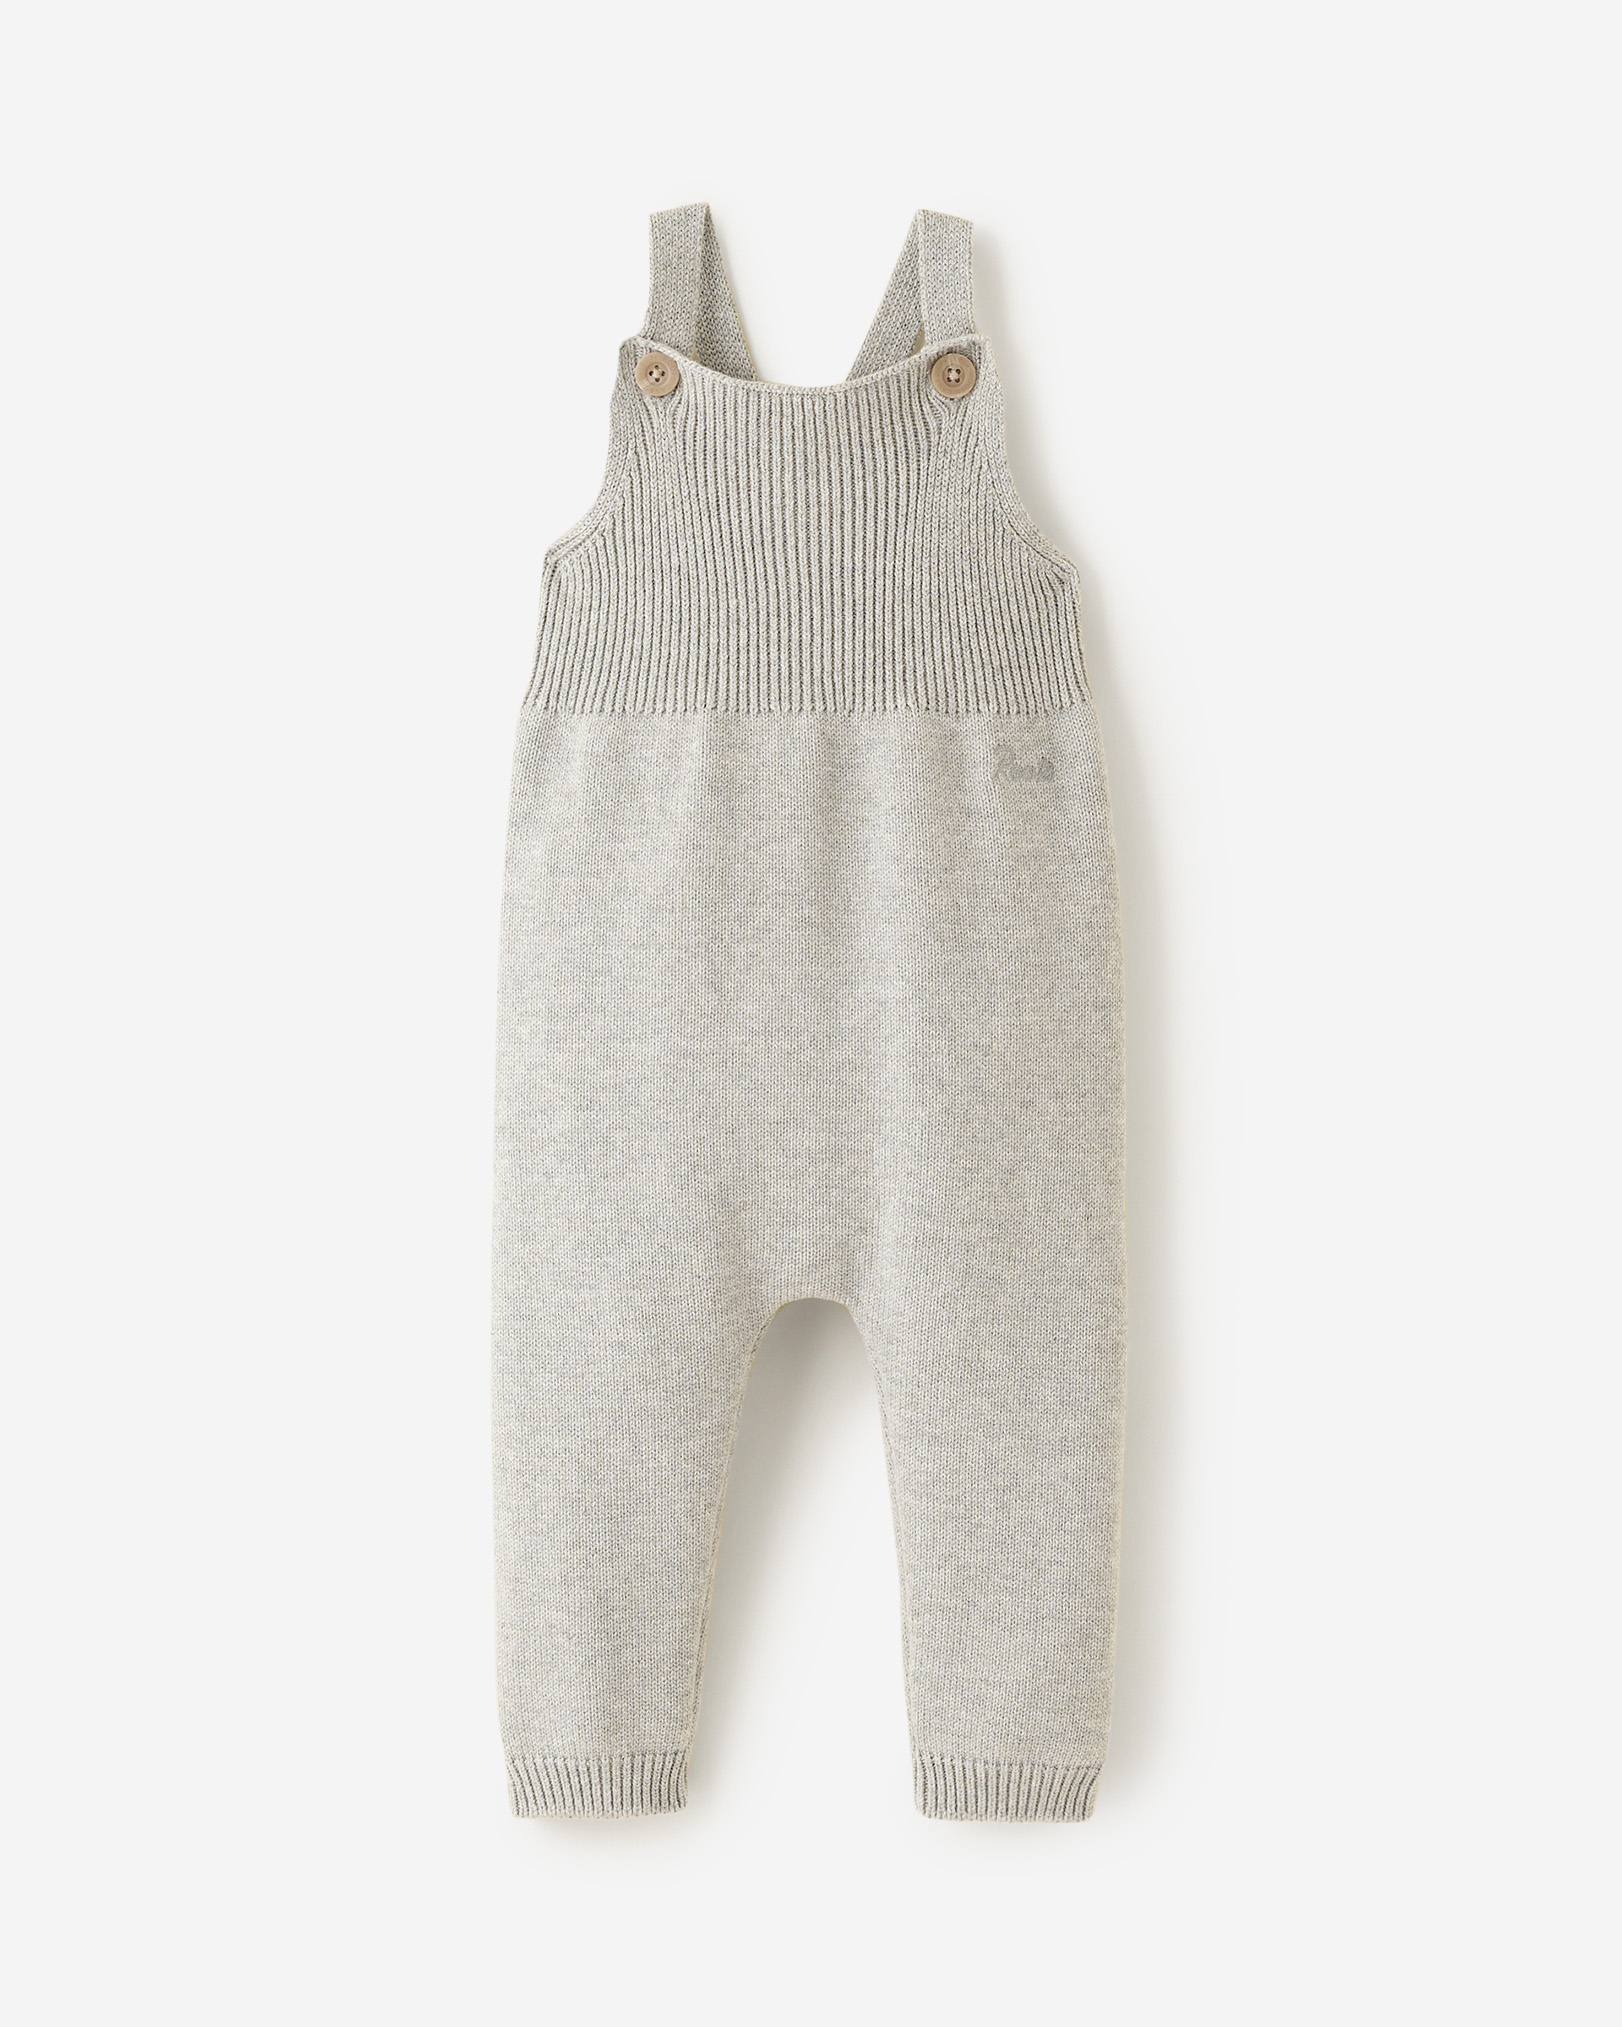 Roots Baby Sweater Knit Overall in Grey Mix